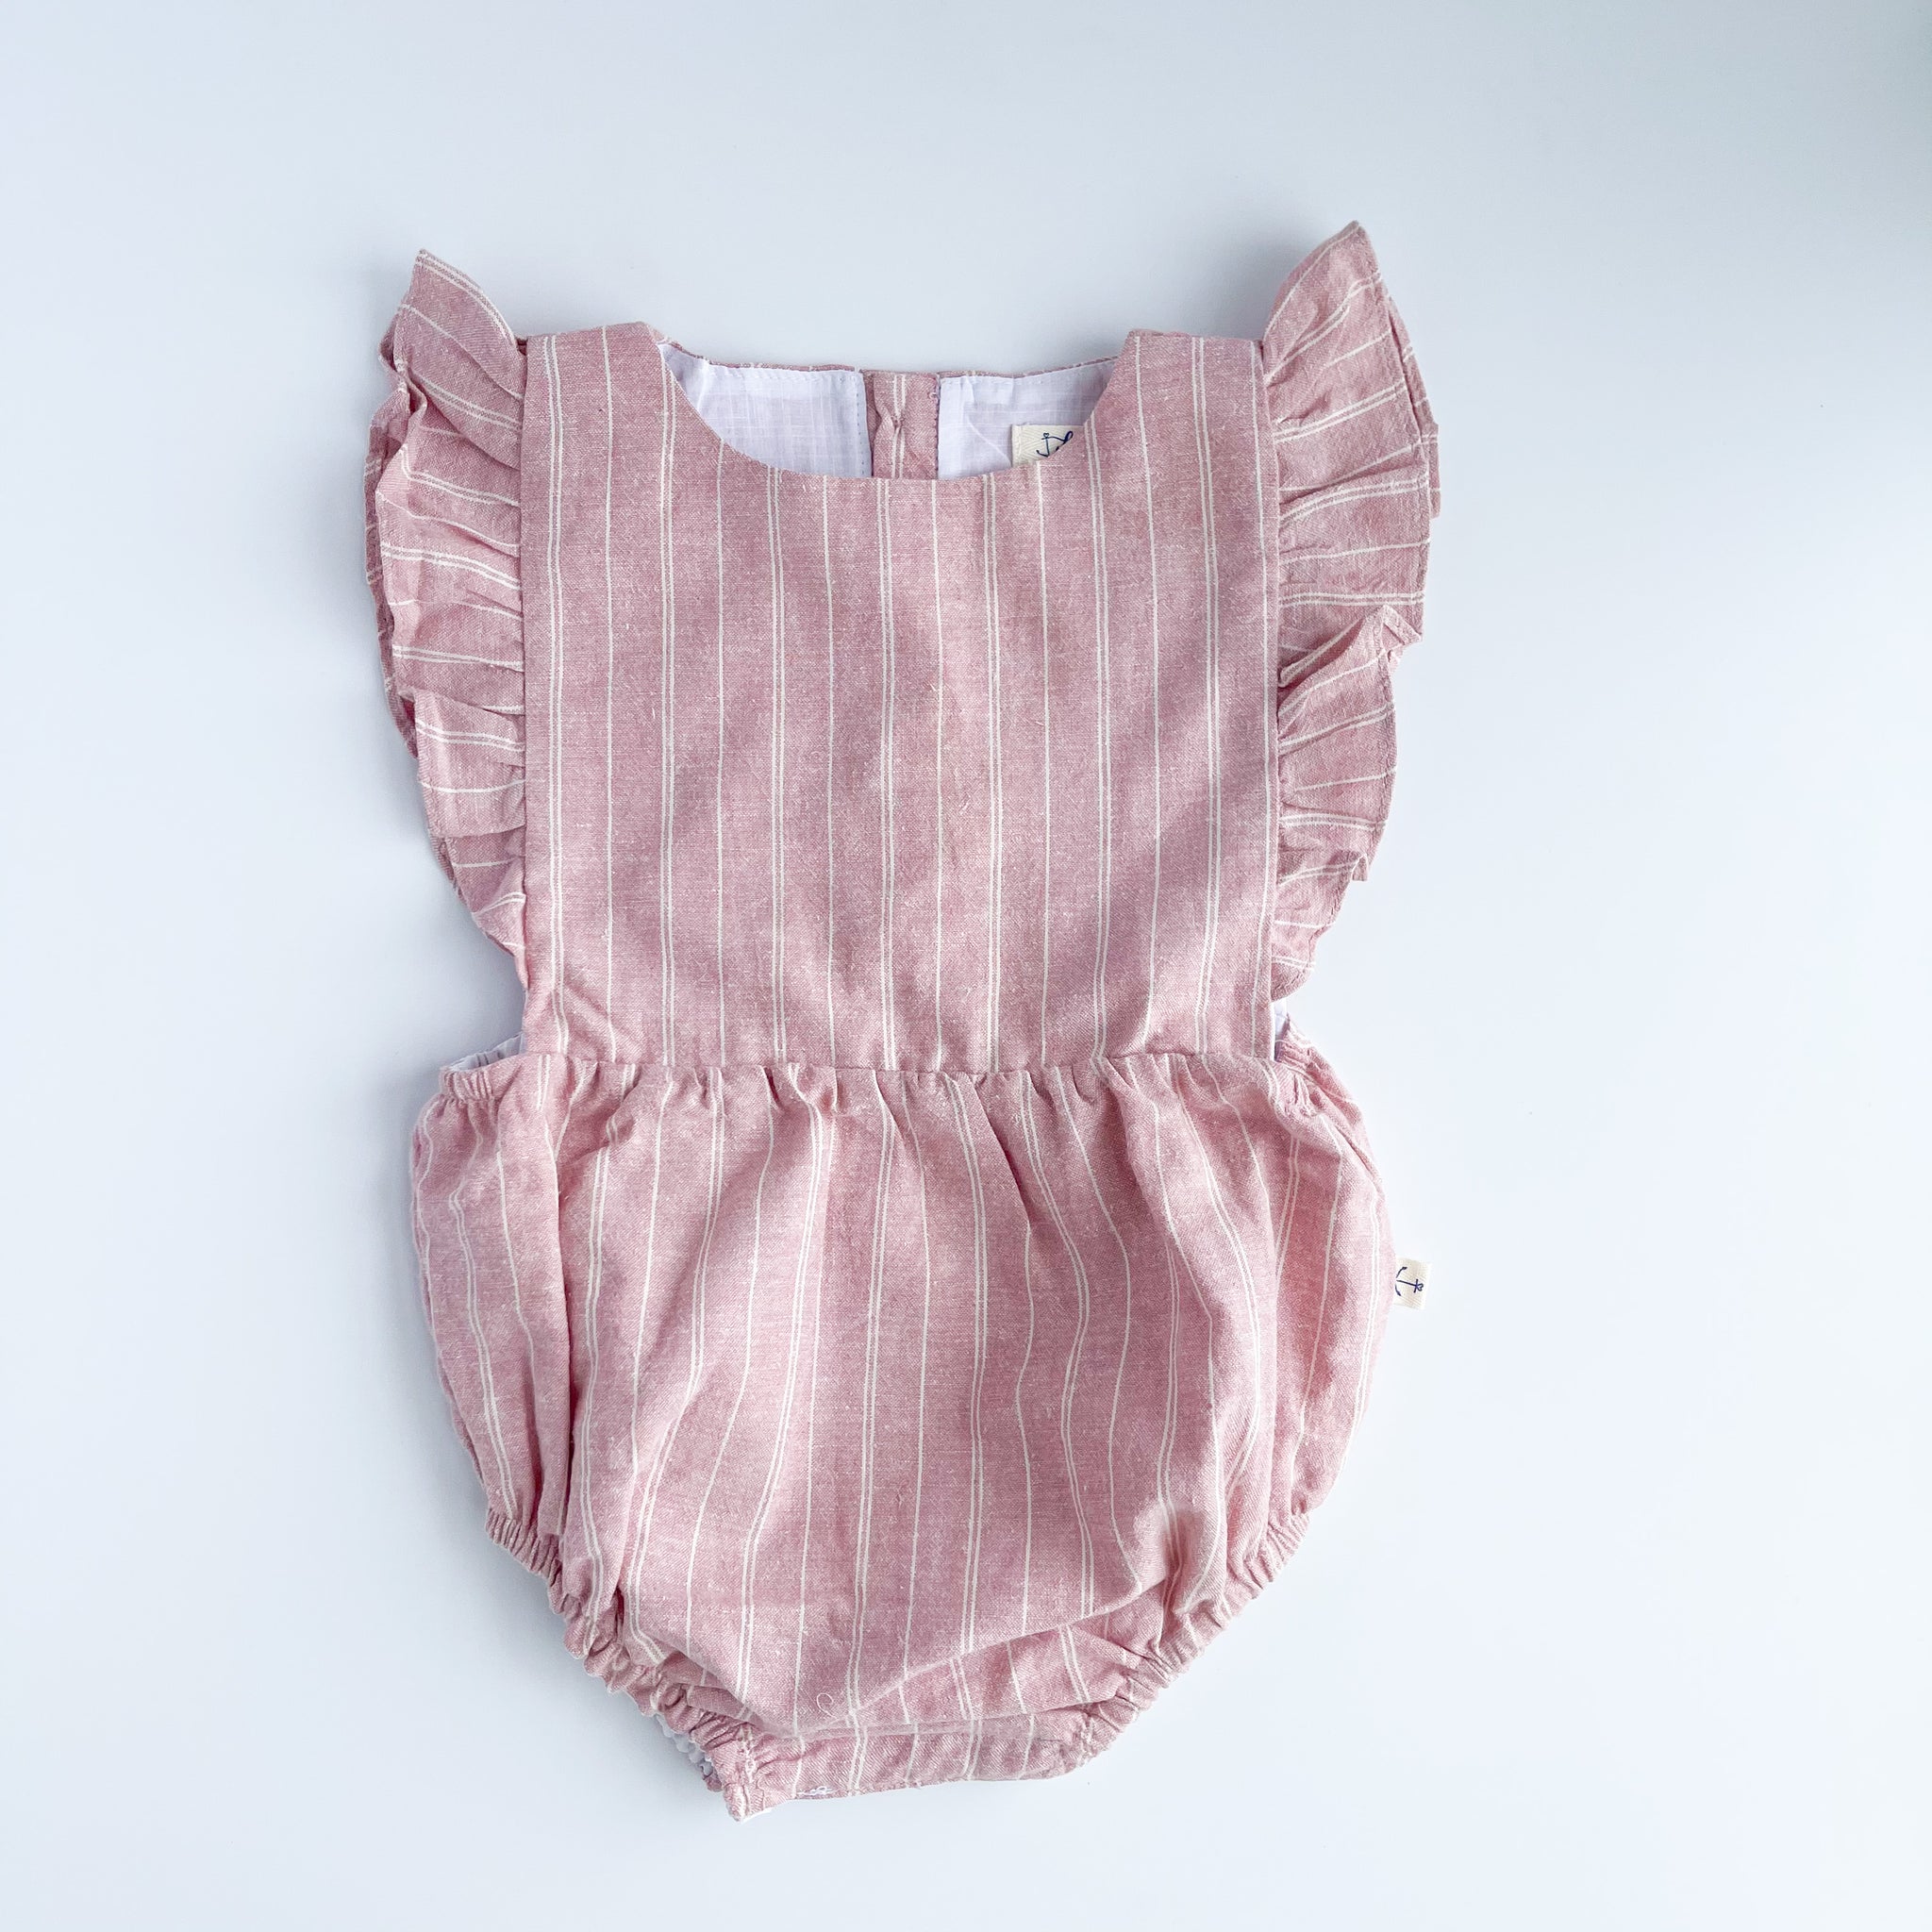 Ruffle Sunsuit in Old Rose